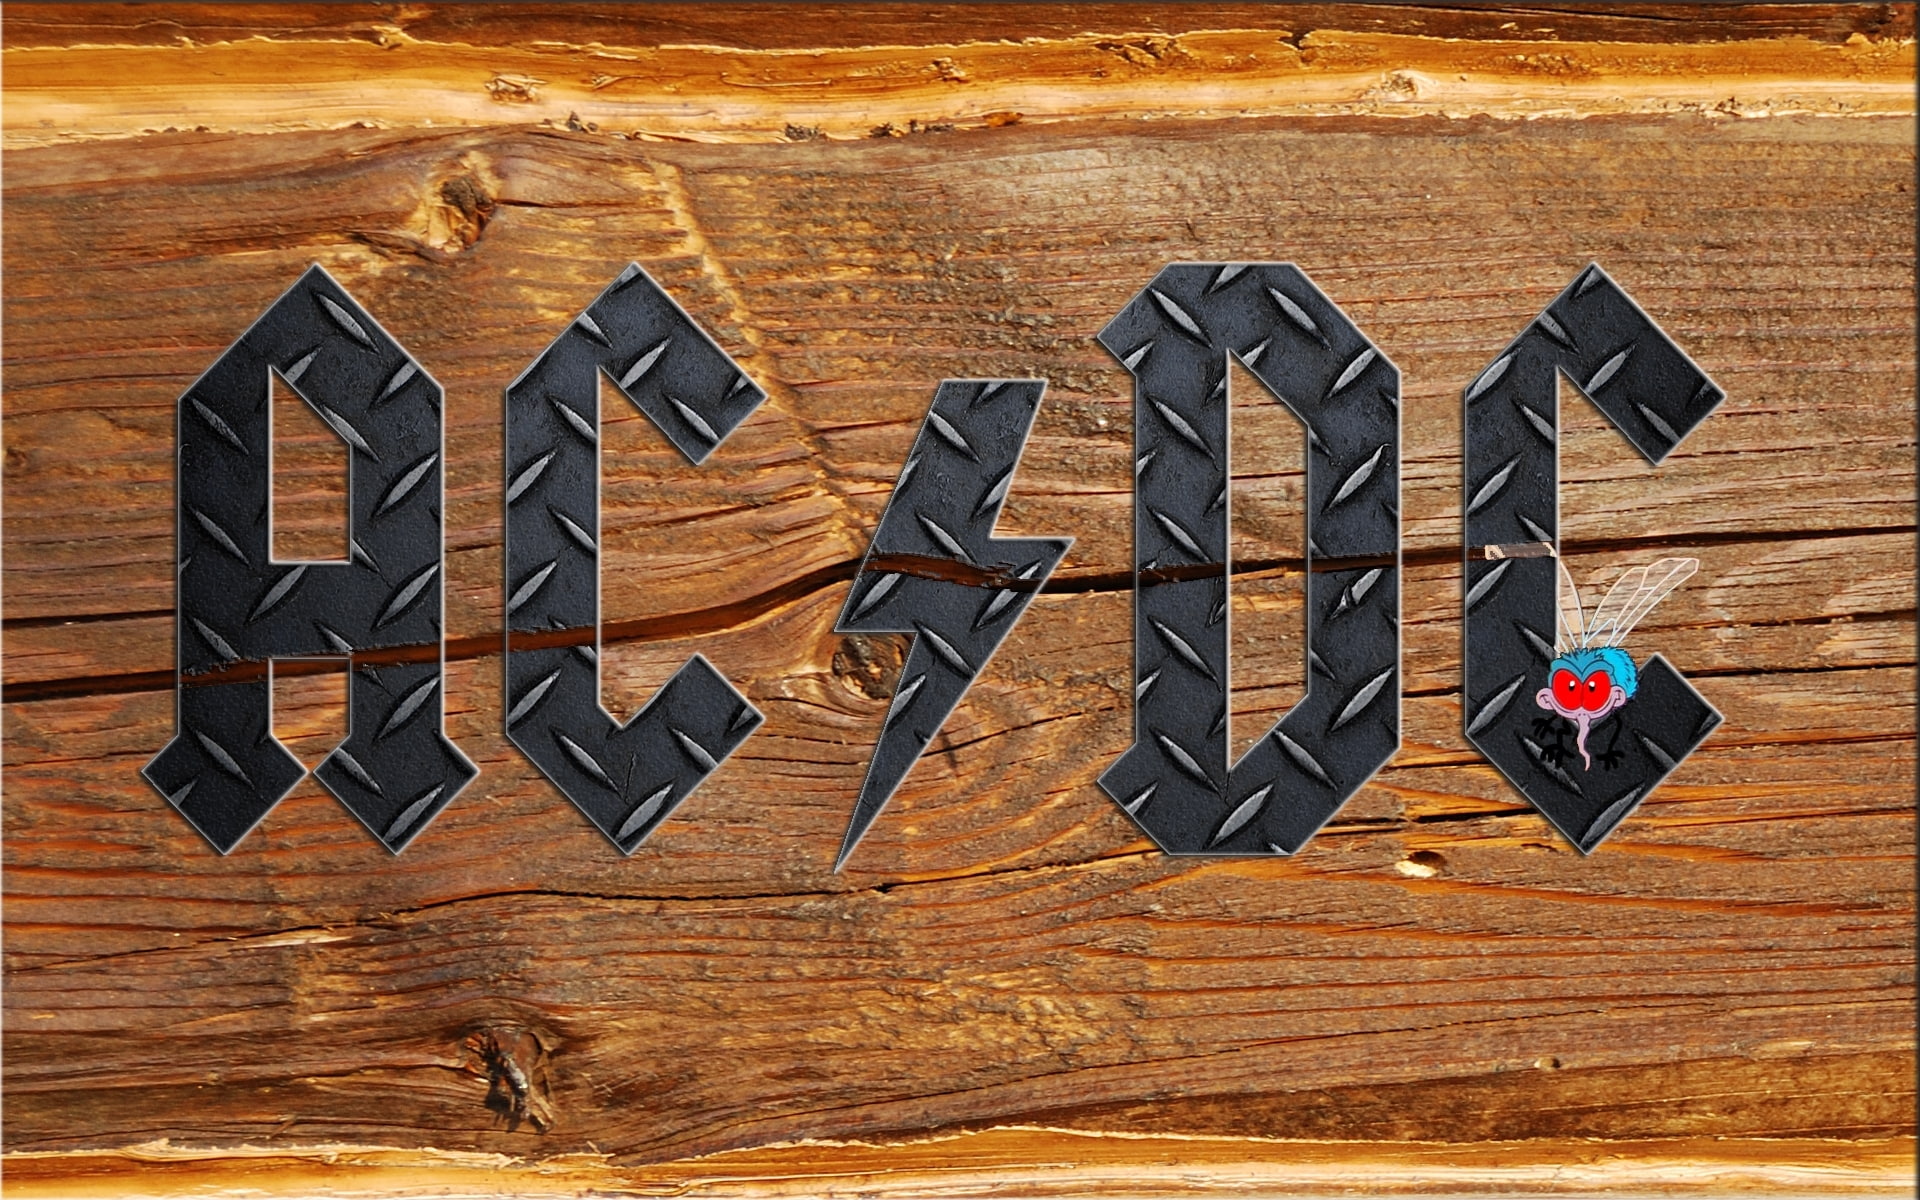 ac dc, acdc, album, bands, classic, covers, entertainment, groups